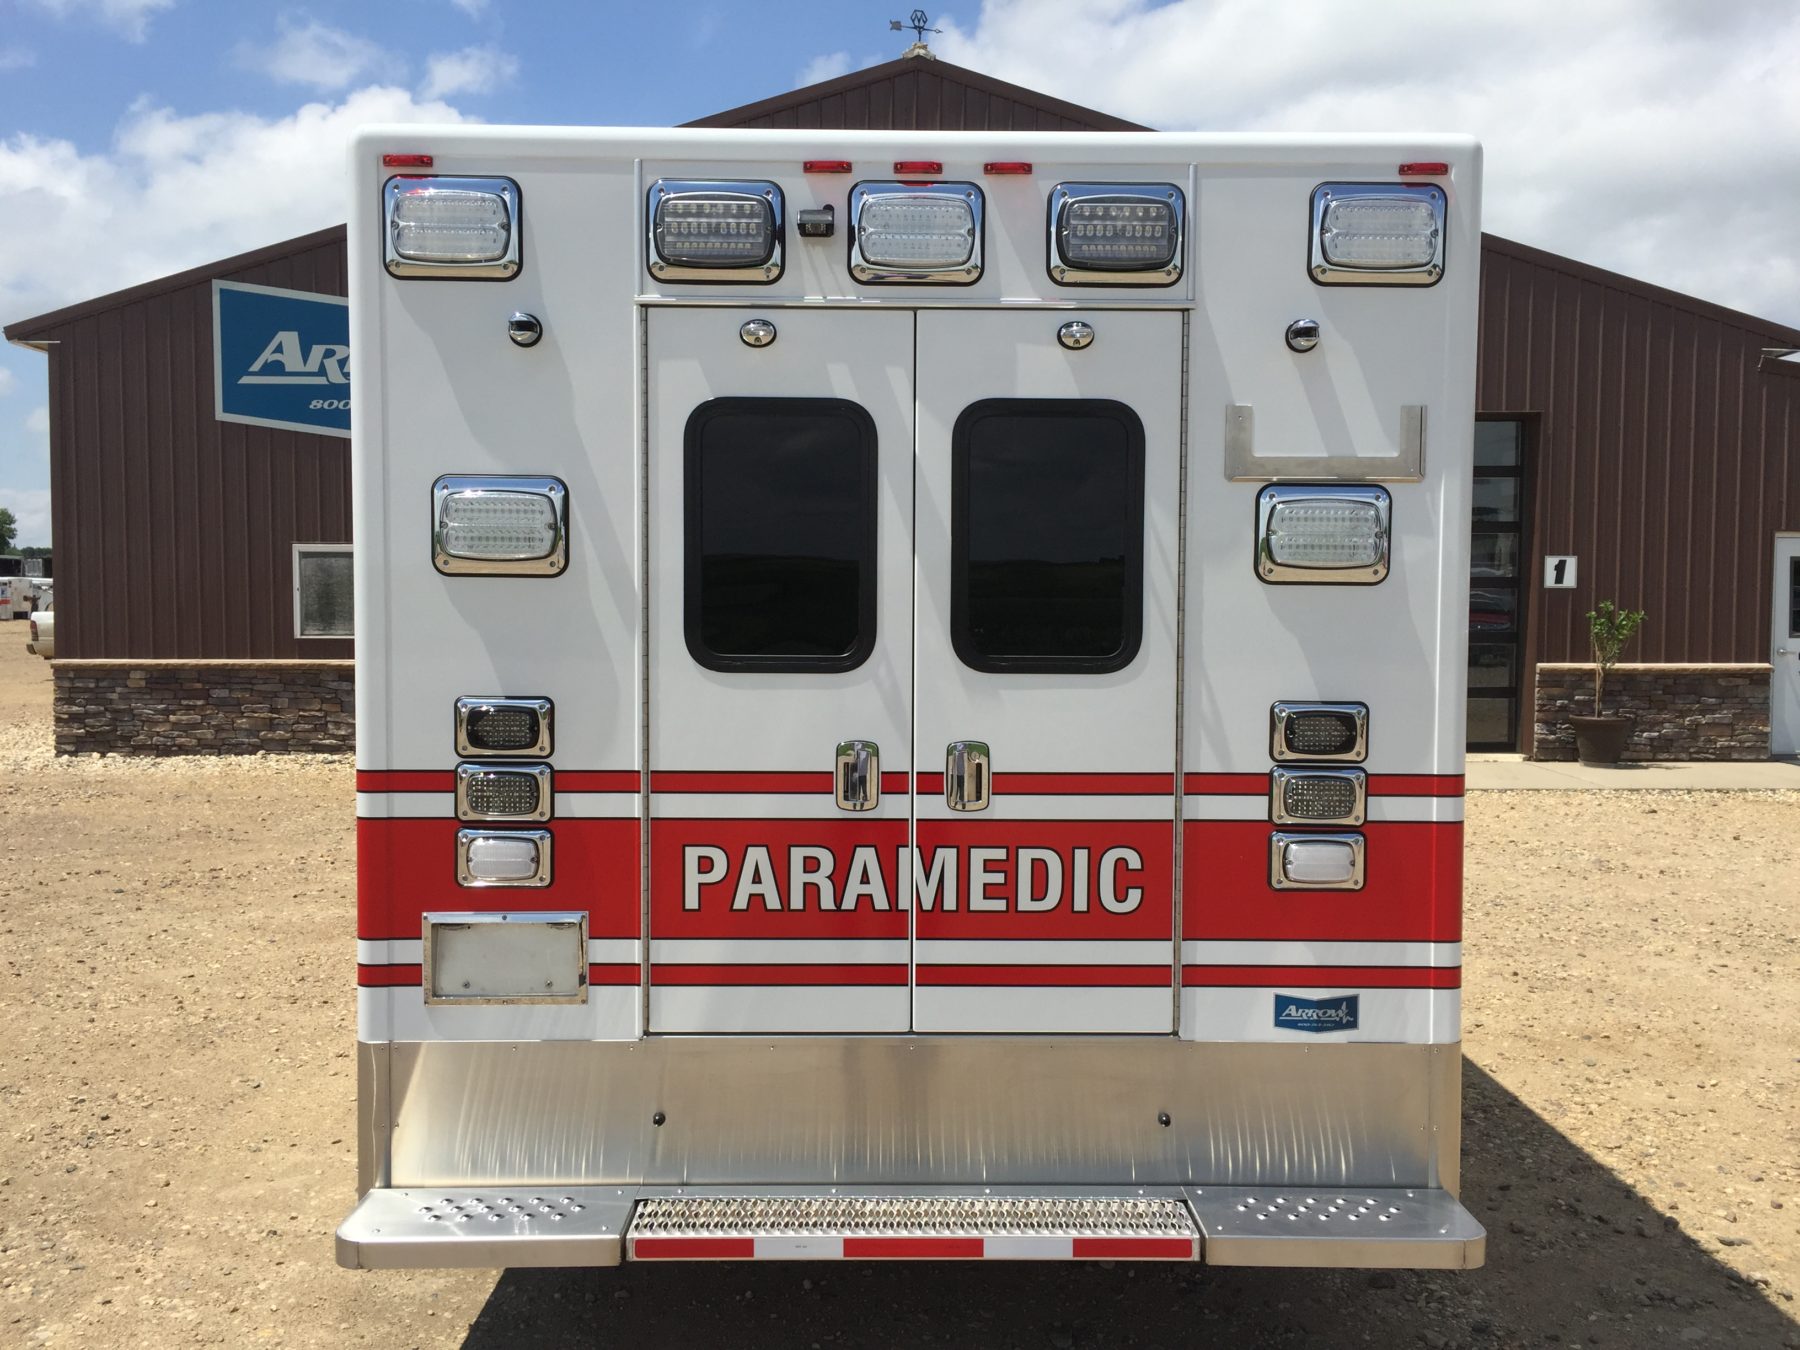 2017 Ram 4500 4x4 Heavy Duty Ambulance For Sale – Picture 8